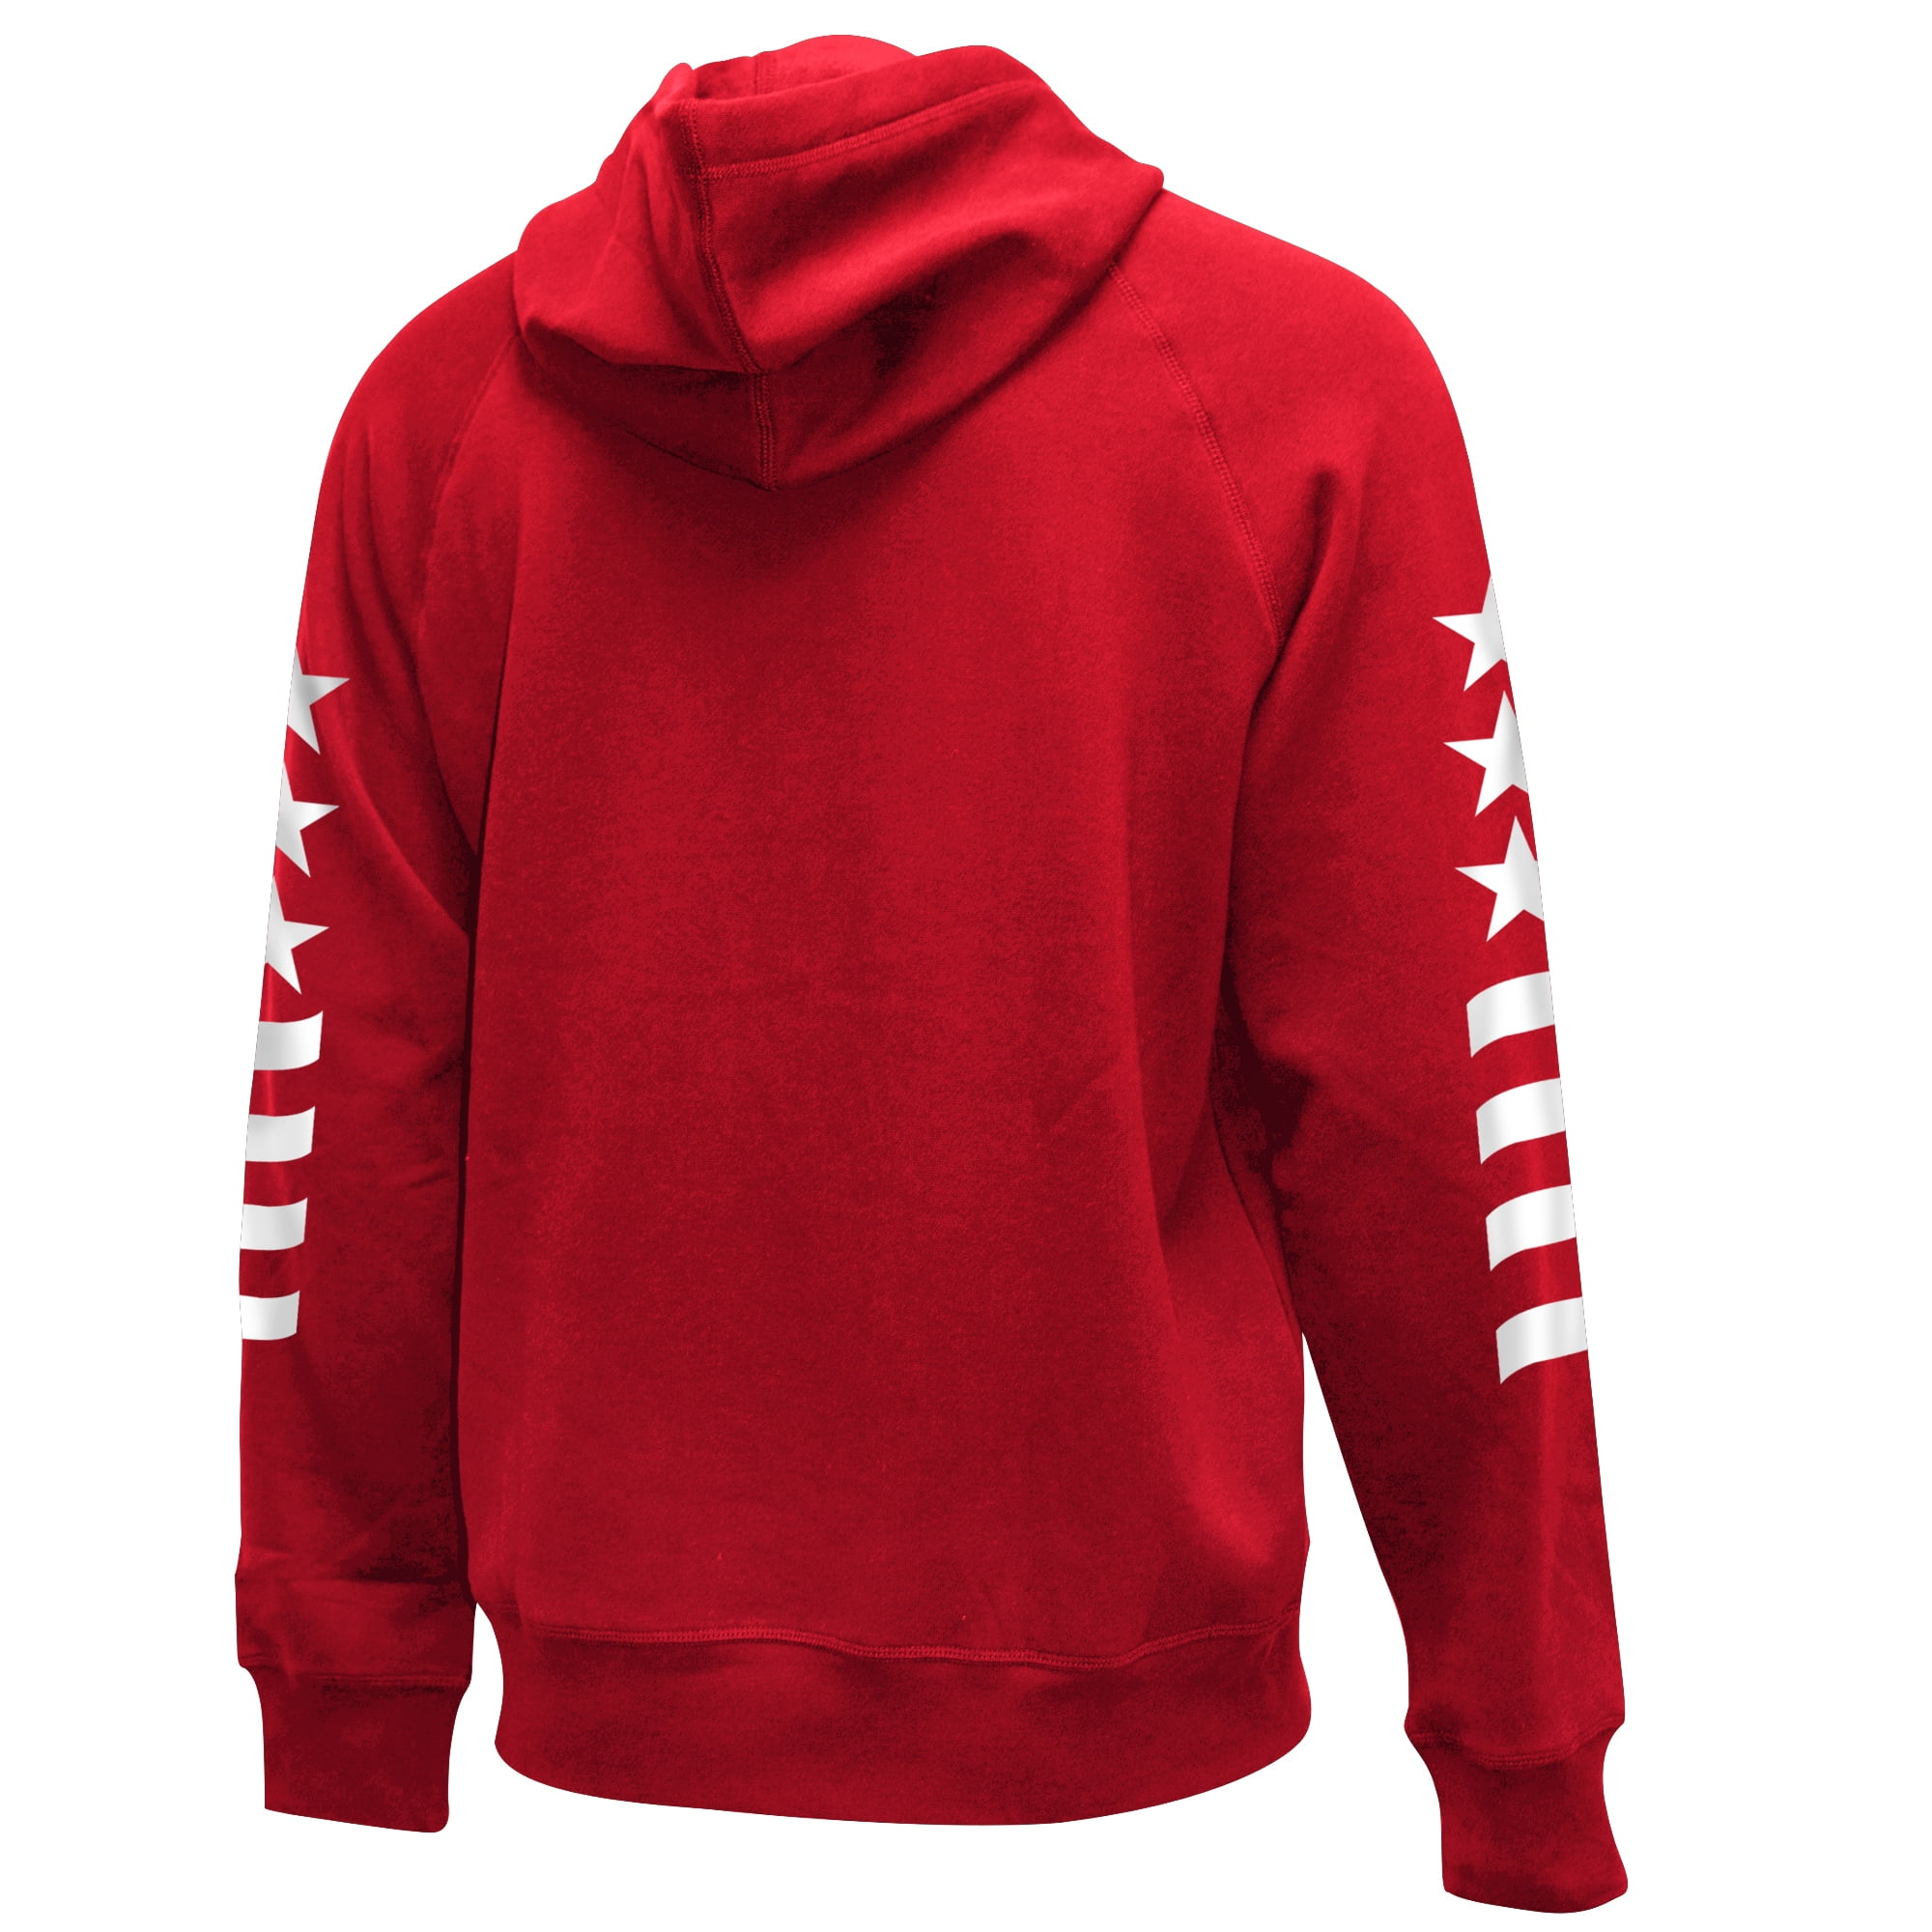 City Edition Pullover Hoodie - Red 